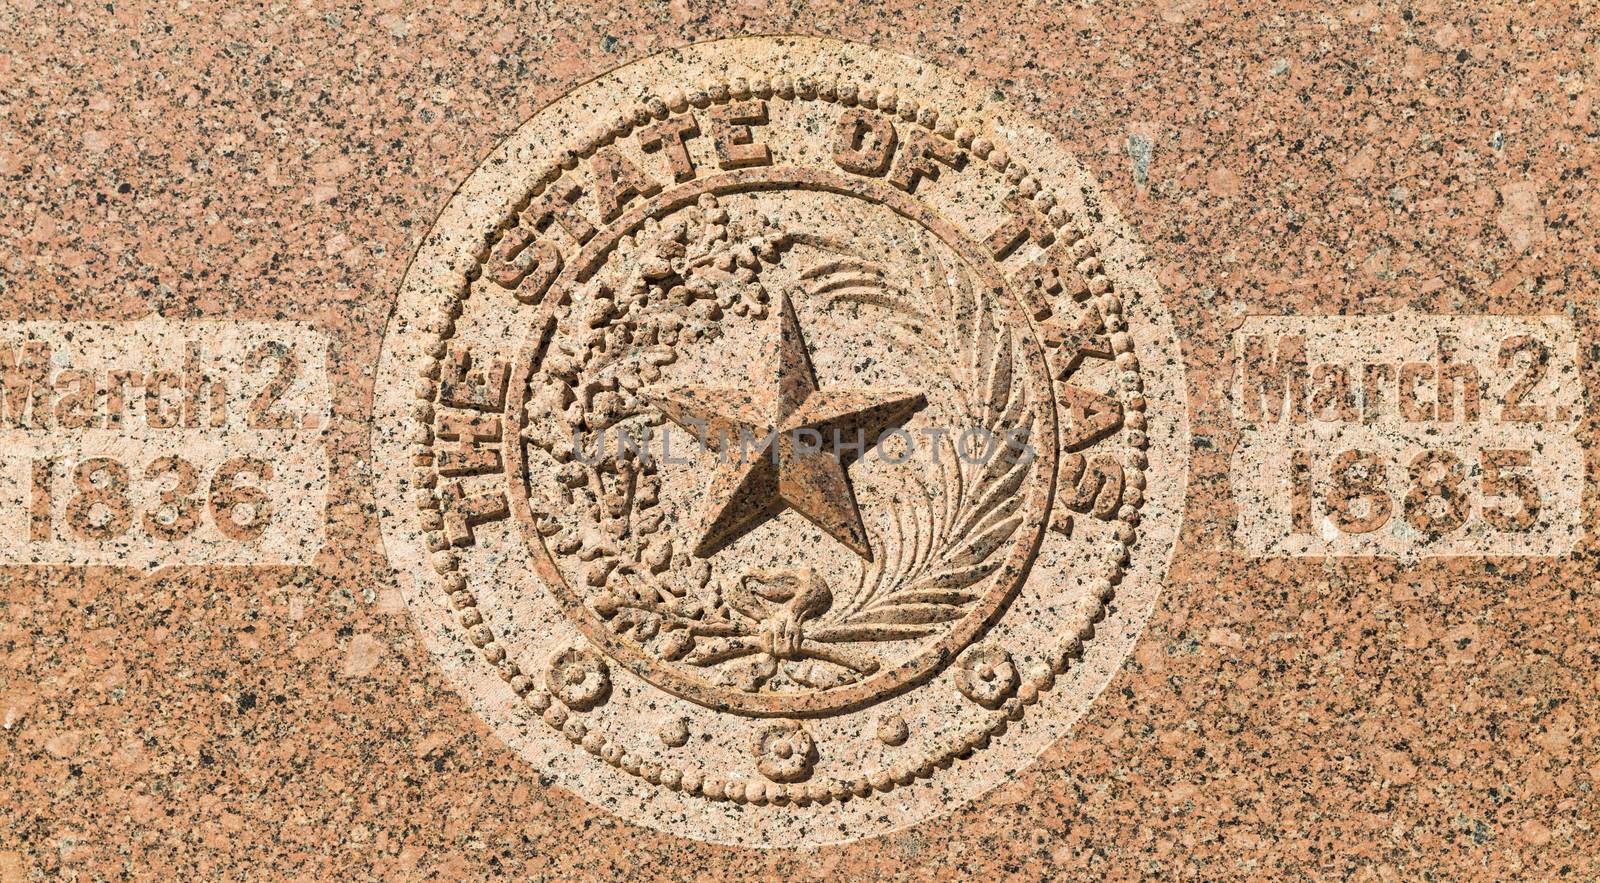 The Star of Texas in Austin by chrisukphoto